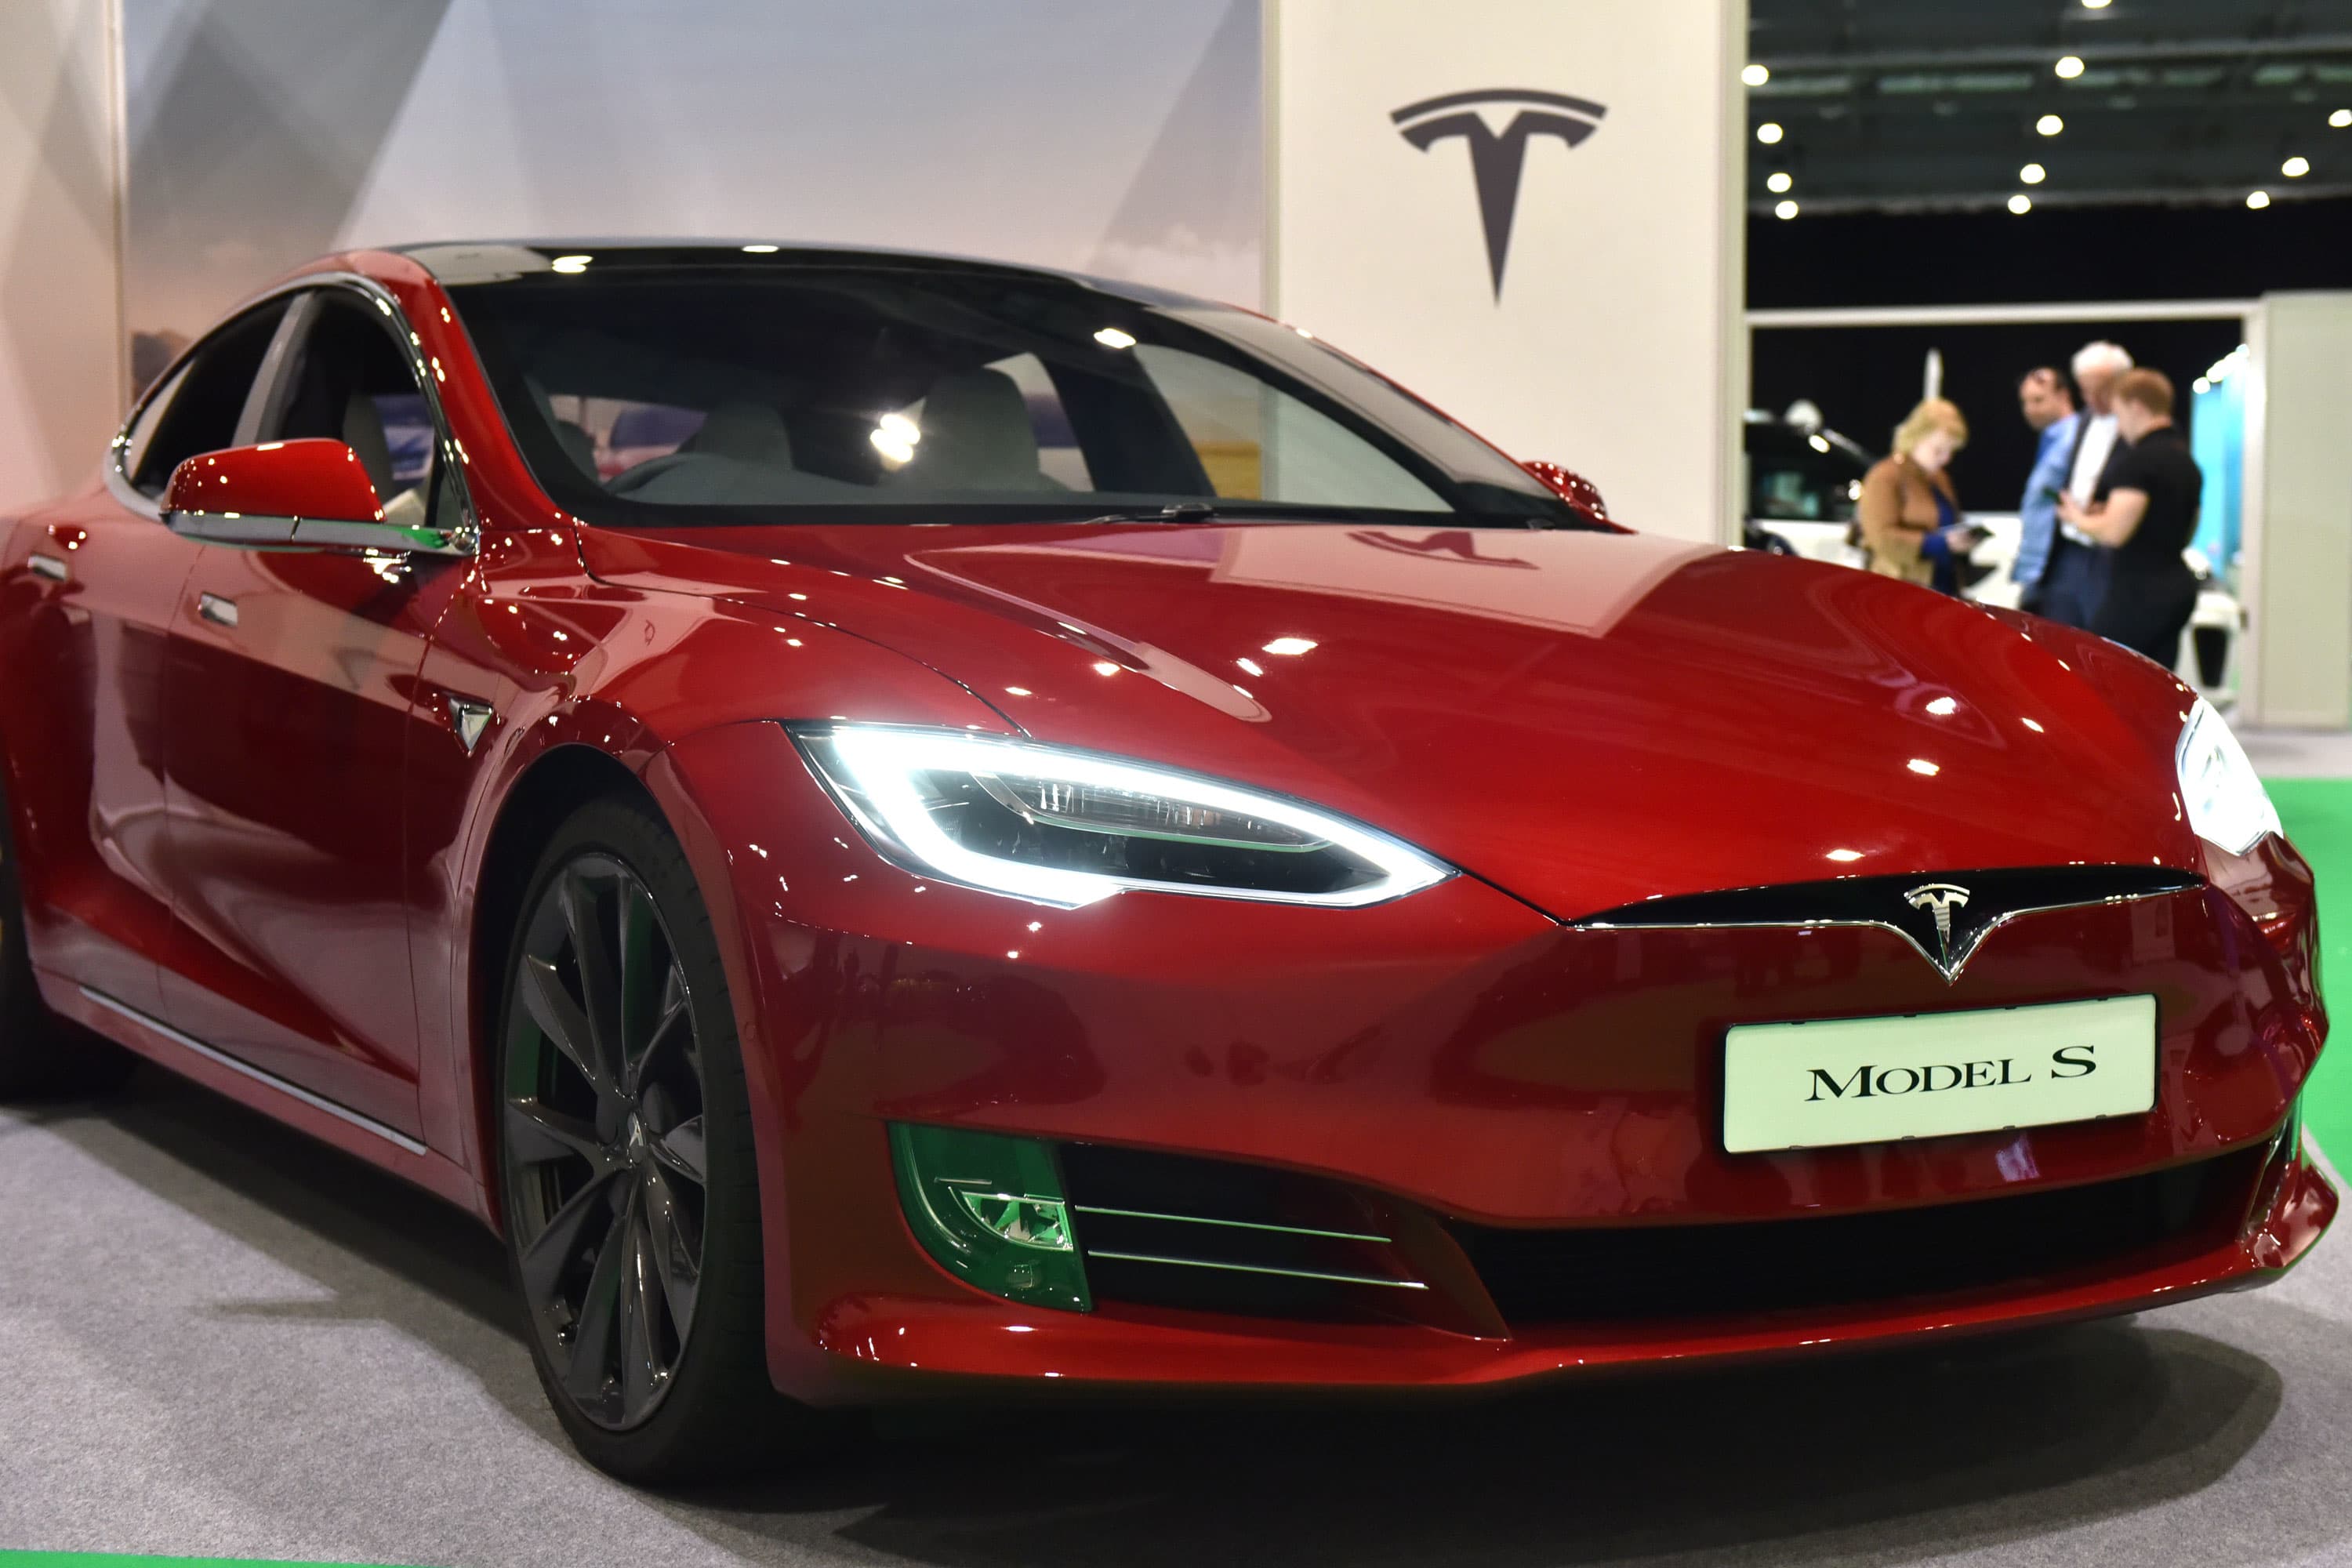 Tesla stock is facing a critical technical support level, trader warns